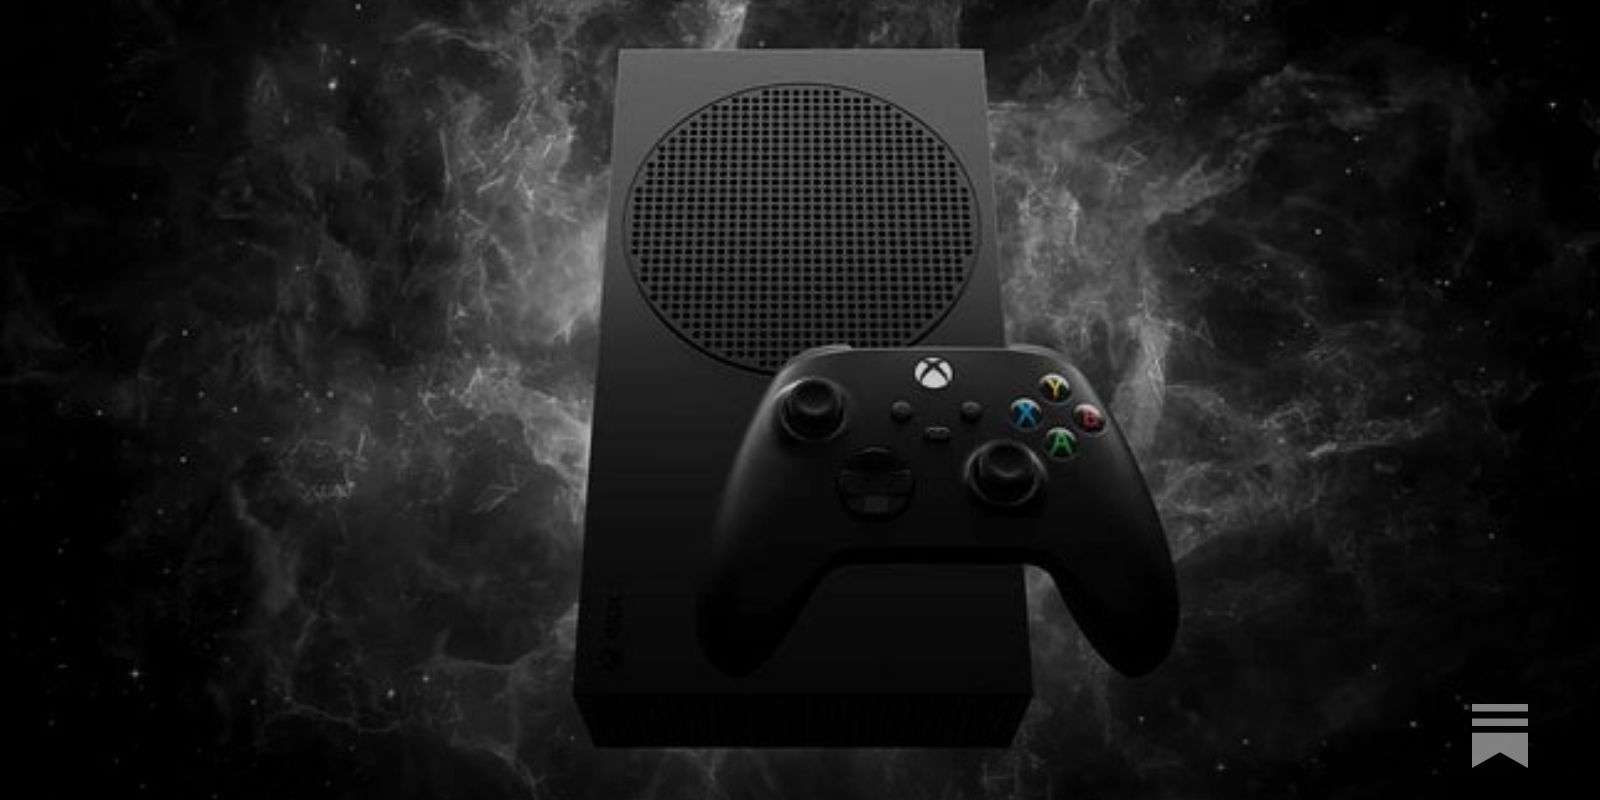 Xbox Series S will be available with 1TB storage in black for $349 on  September 1st